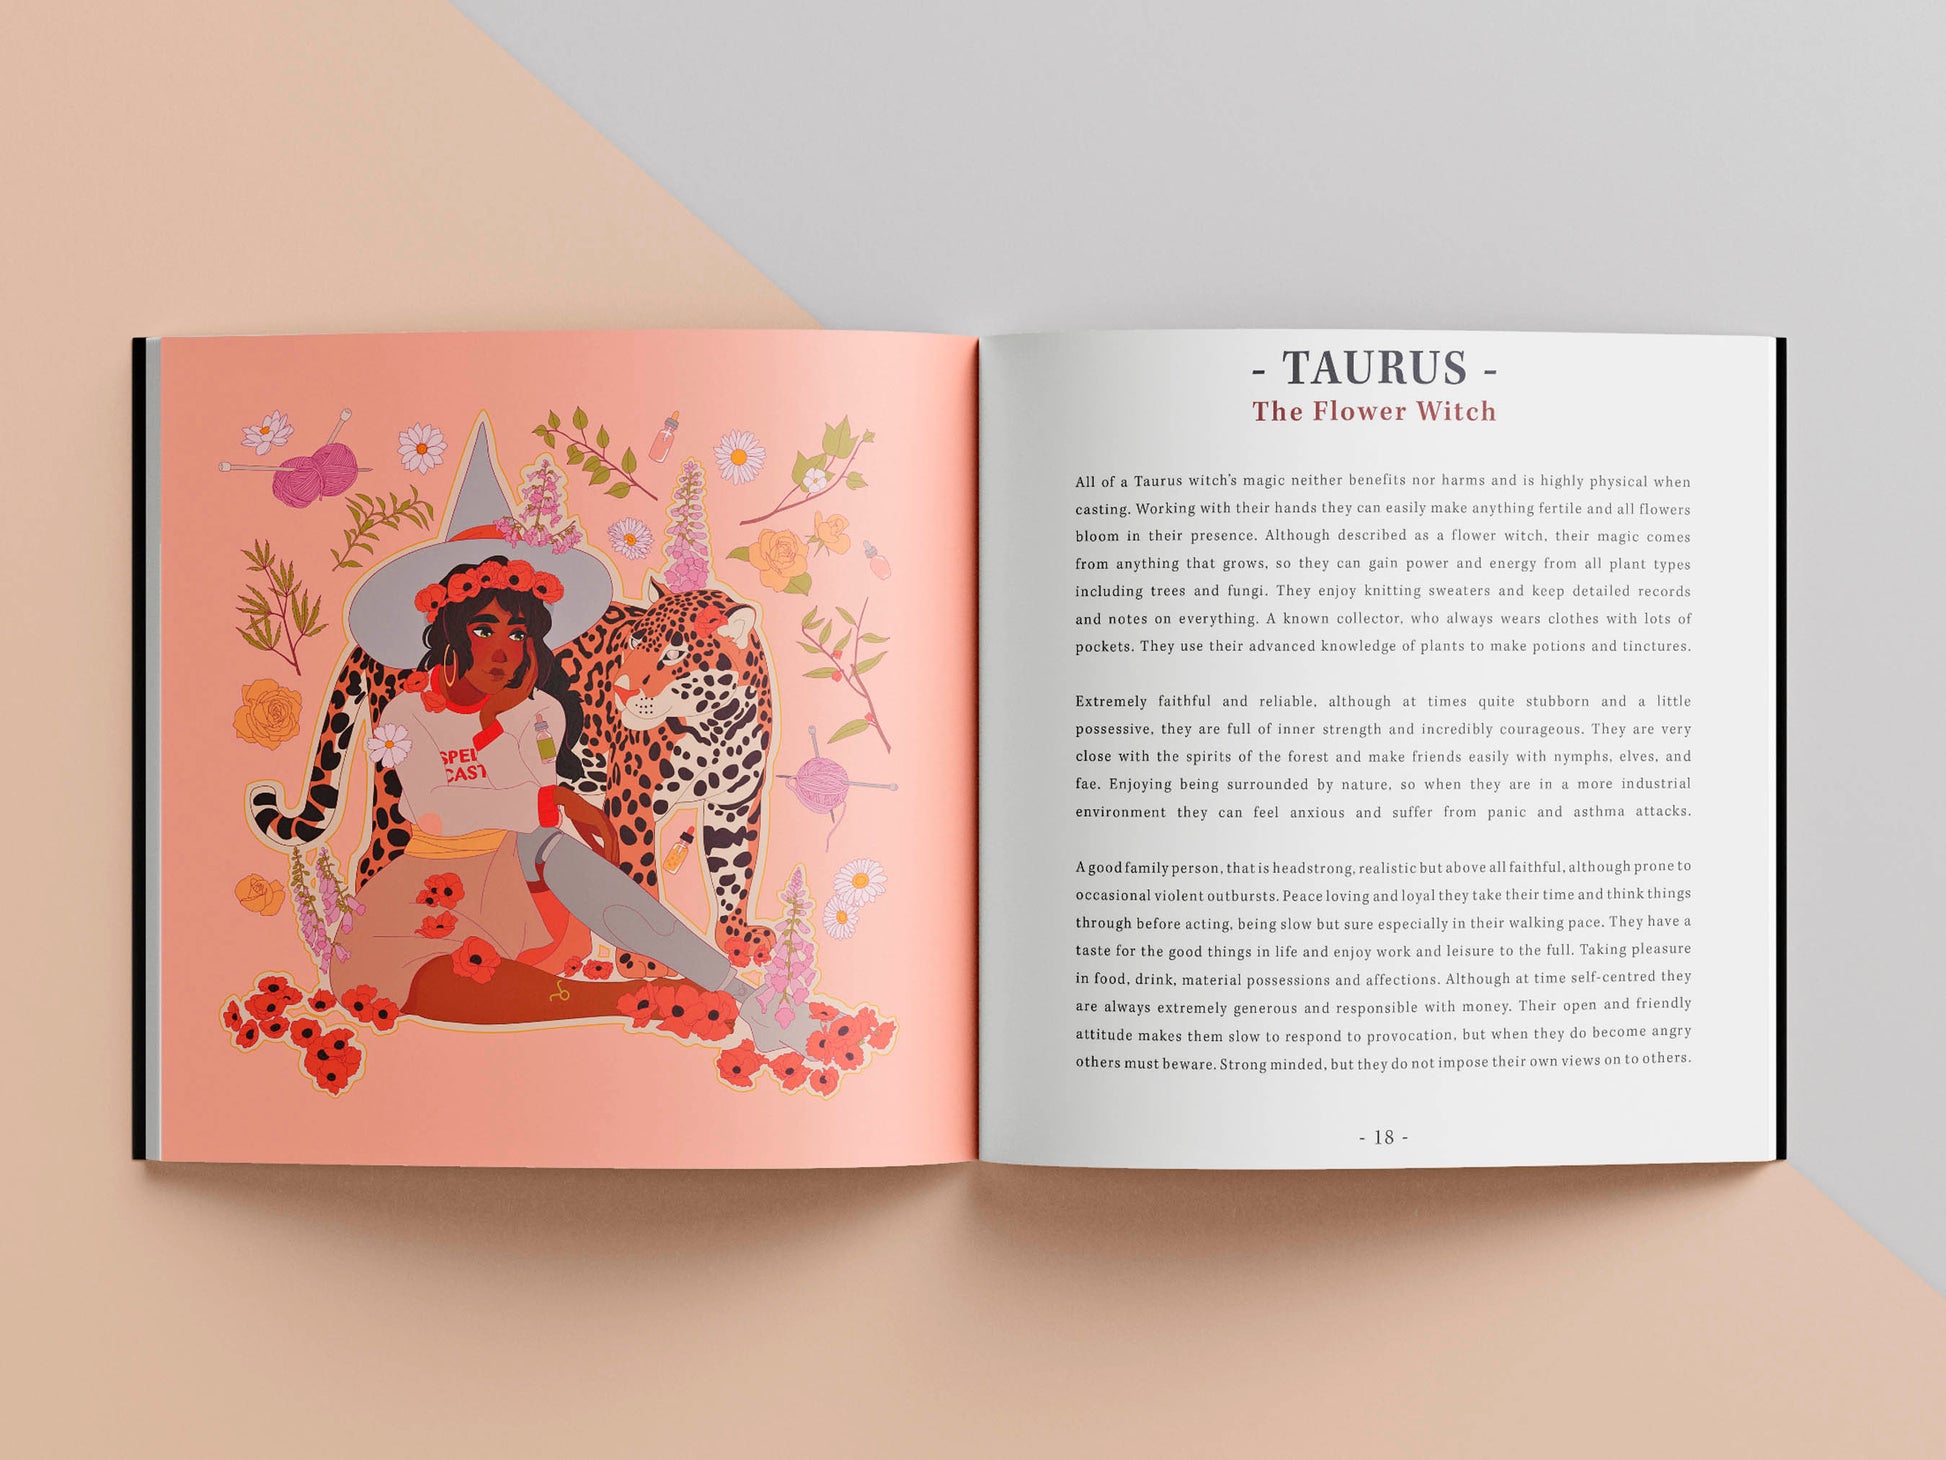 Inside pages of Horoscope Witches book showing a cartoon illustration and a page of text describing Taurus the Flower Witch.